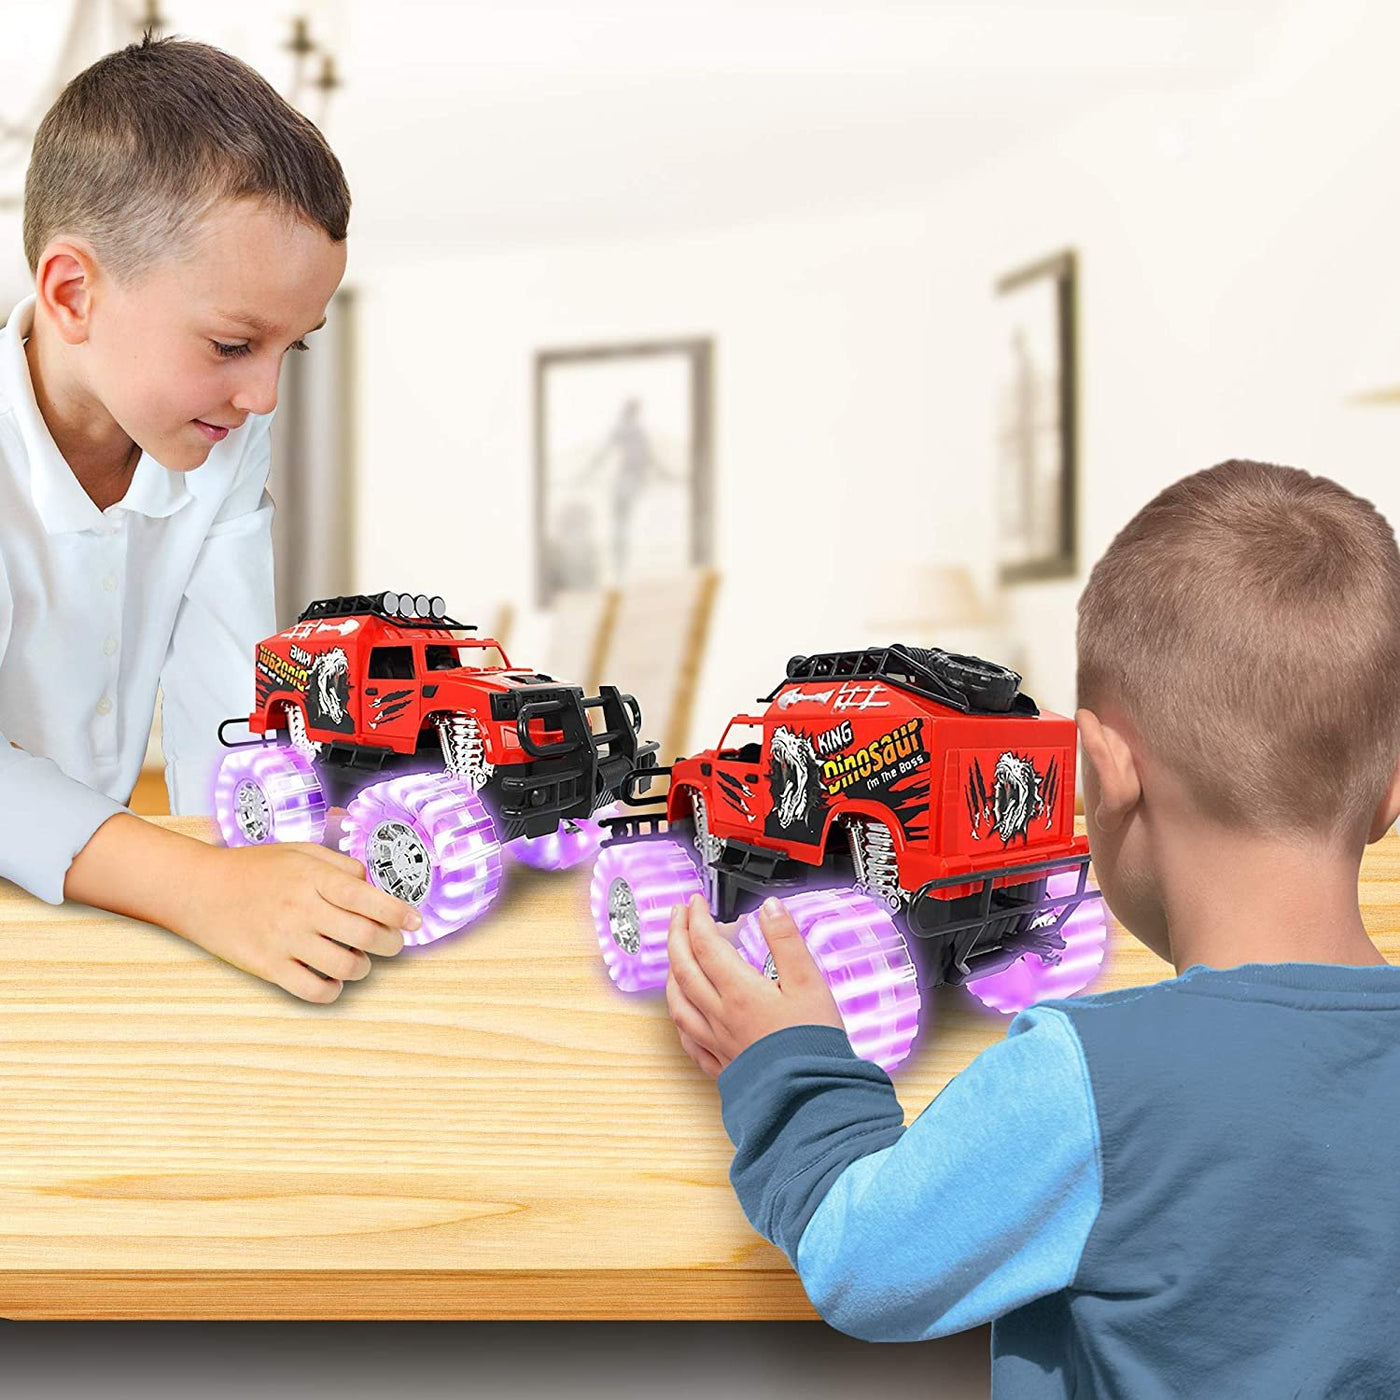 ArtCreativity Light Up Red Monster Trucks - 11 Inch Monster Truck with Beautiful Flashing LED Tires and Cool Music - Push n Go Toy Cars - Best Gift for Boys & Girls Ages 3+